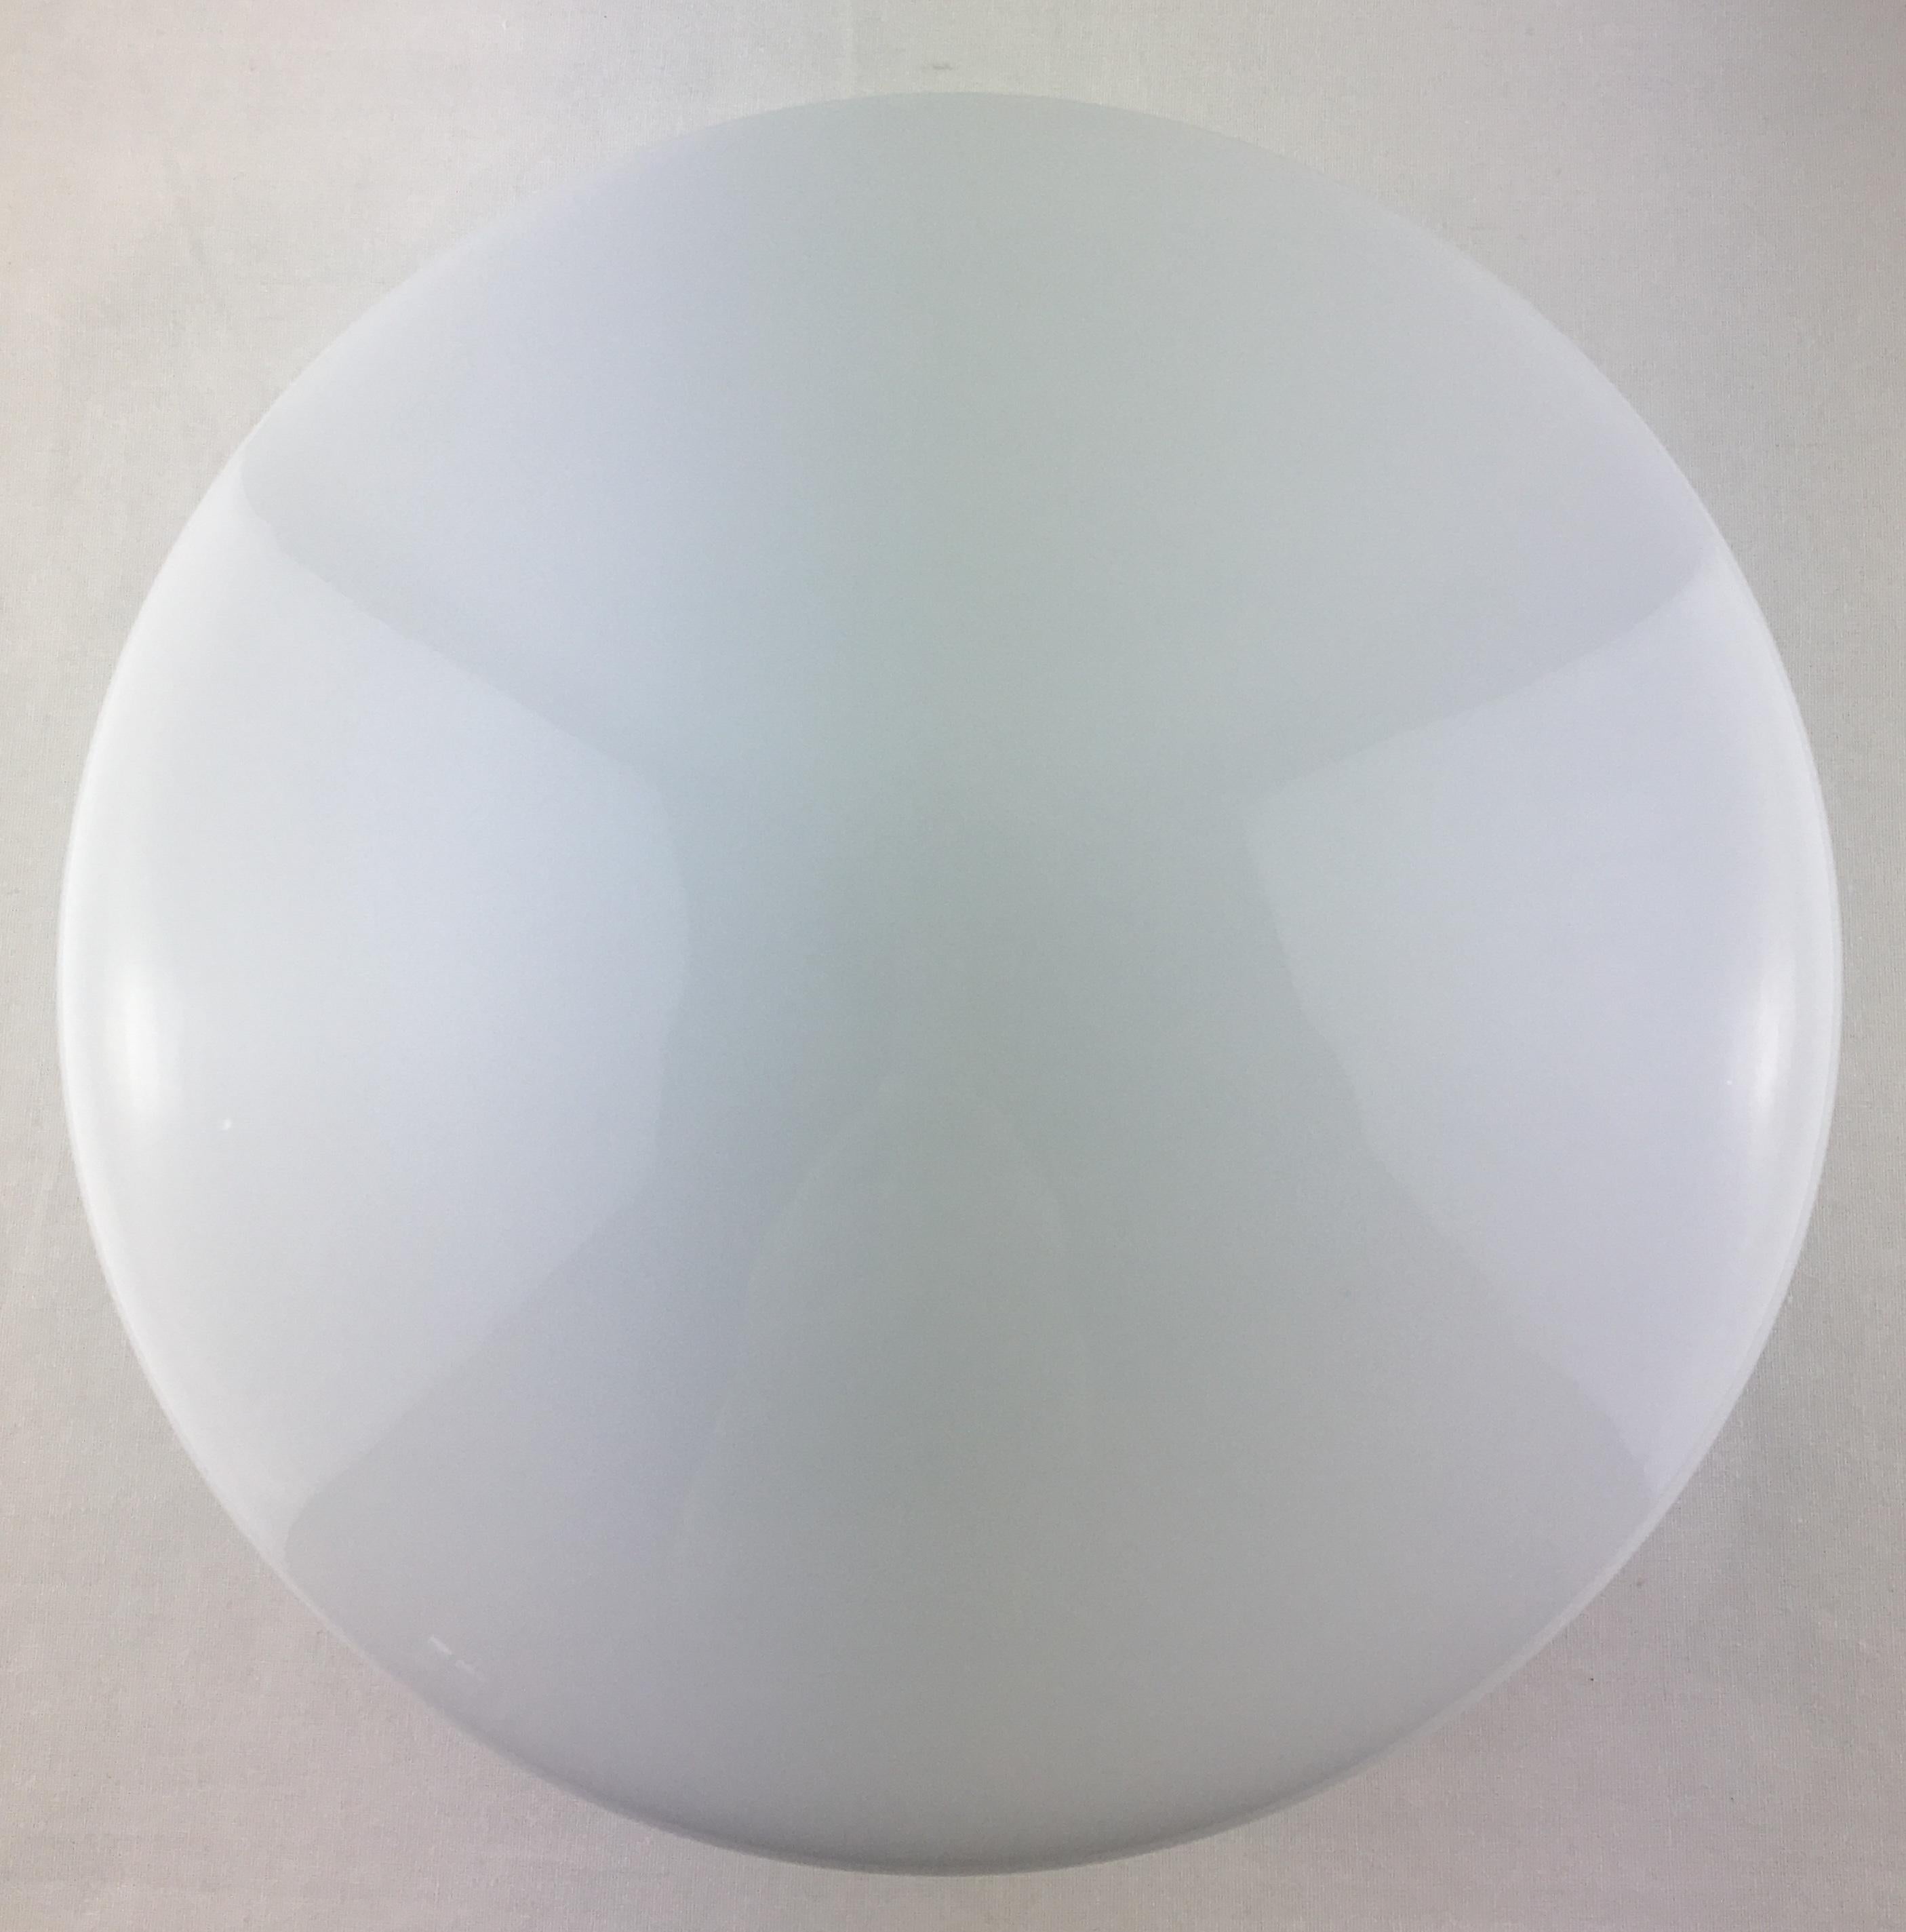 French modernist opaline and chrome pendant.

Beautiful white opaline pendant that evokes a Chinese lantern. Round and smooth, this French suspension is both discreet, timeless and original. It would look wonderful in a room with colorful walls.